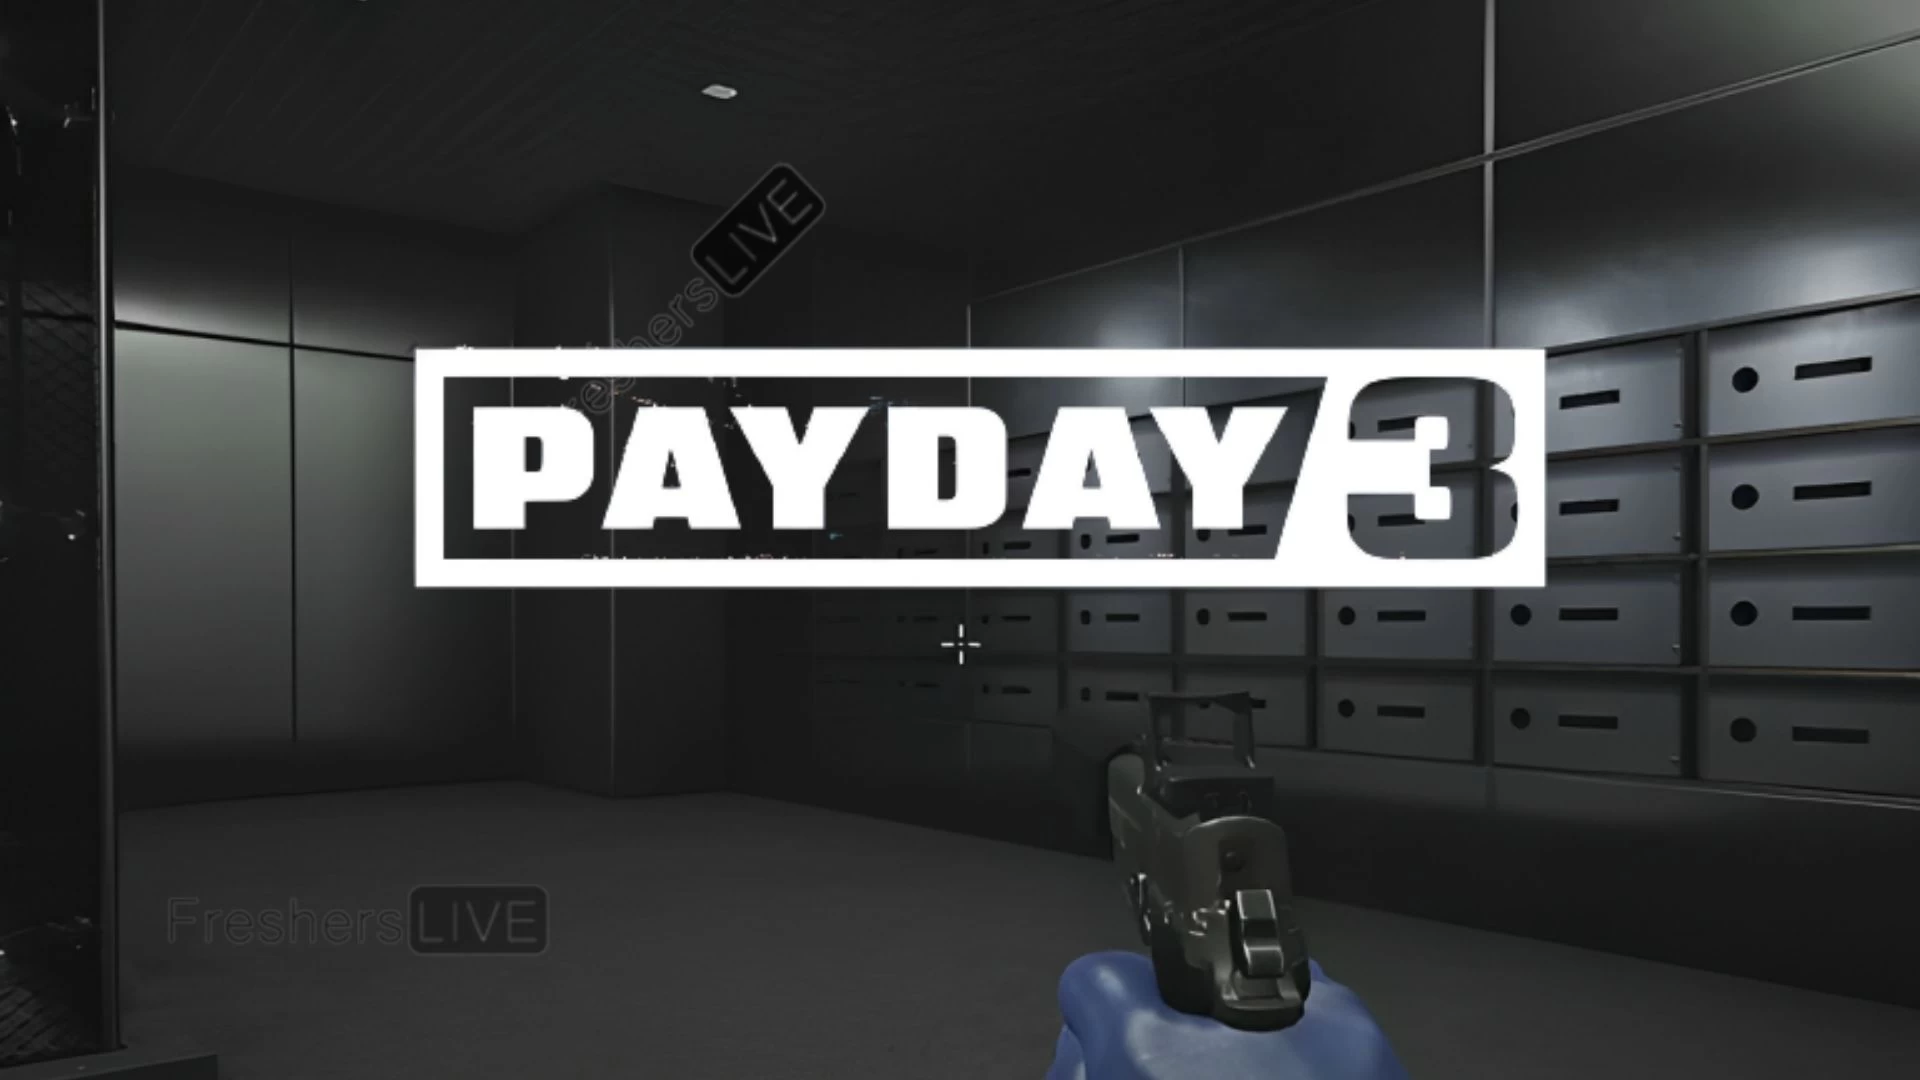 Payday 3 Vault Code, Gameplay, Trailer and Release Date